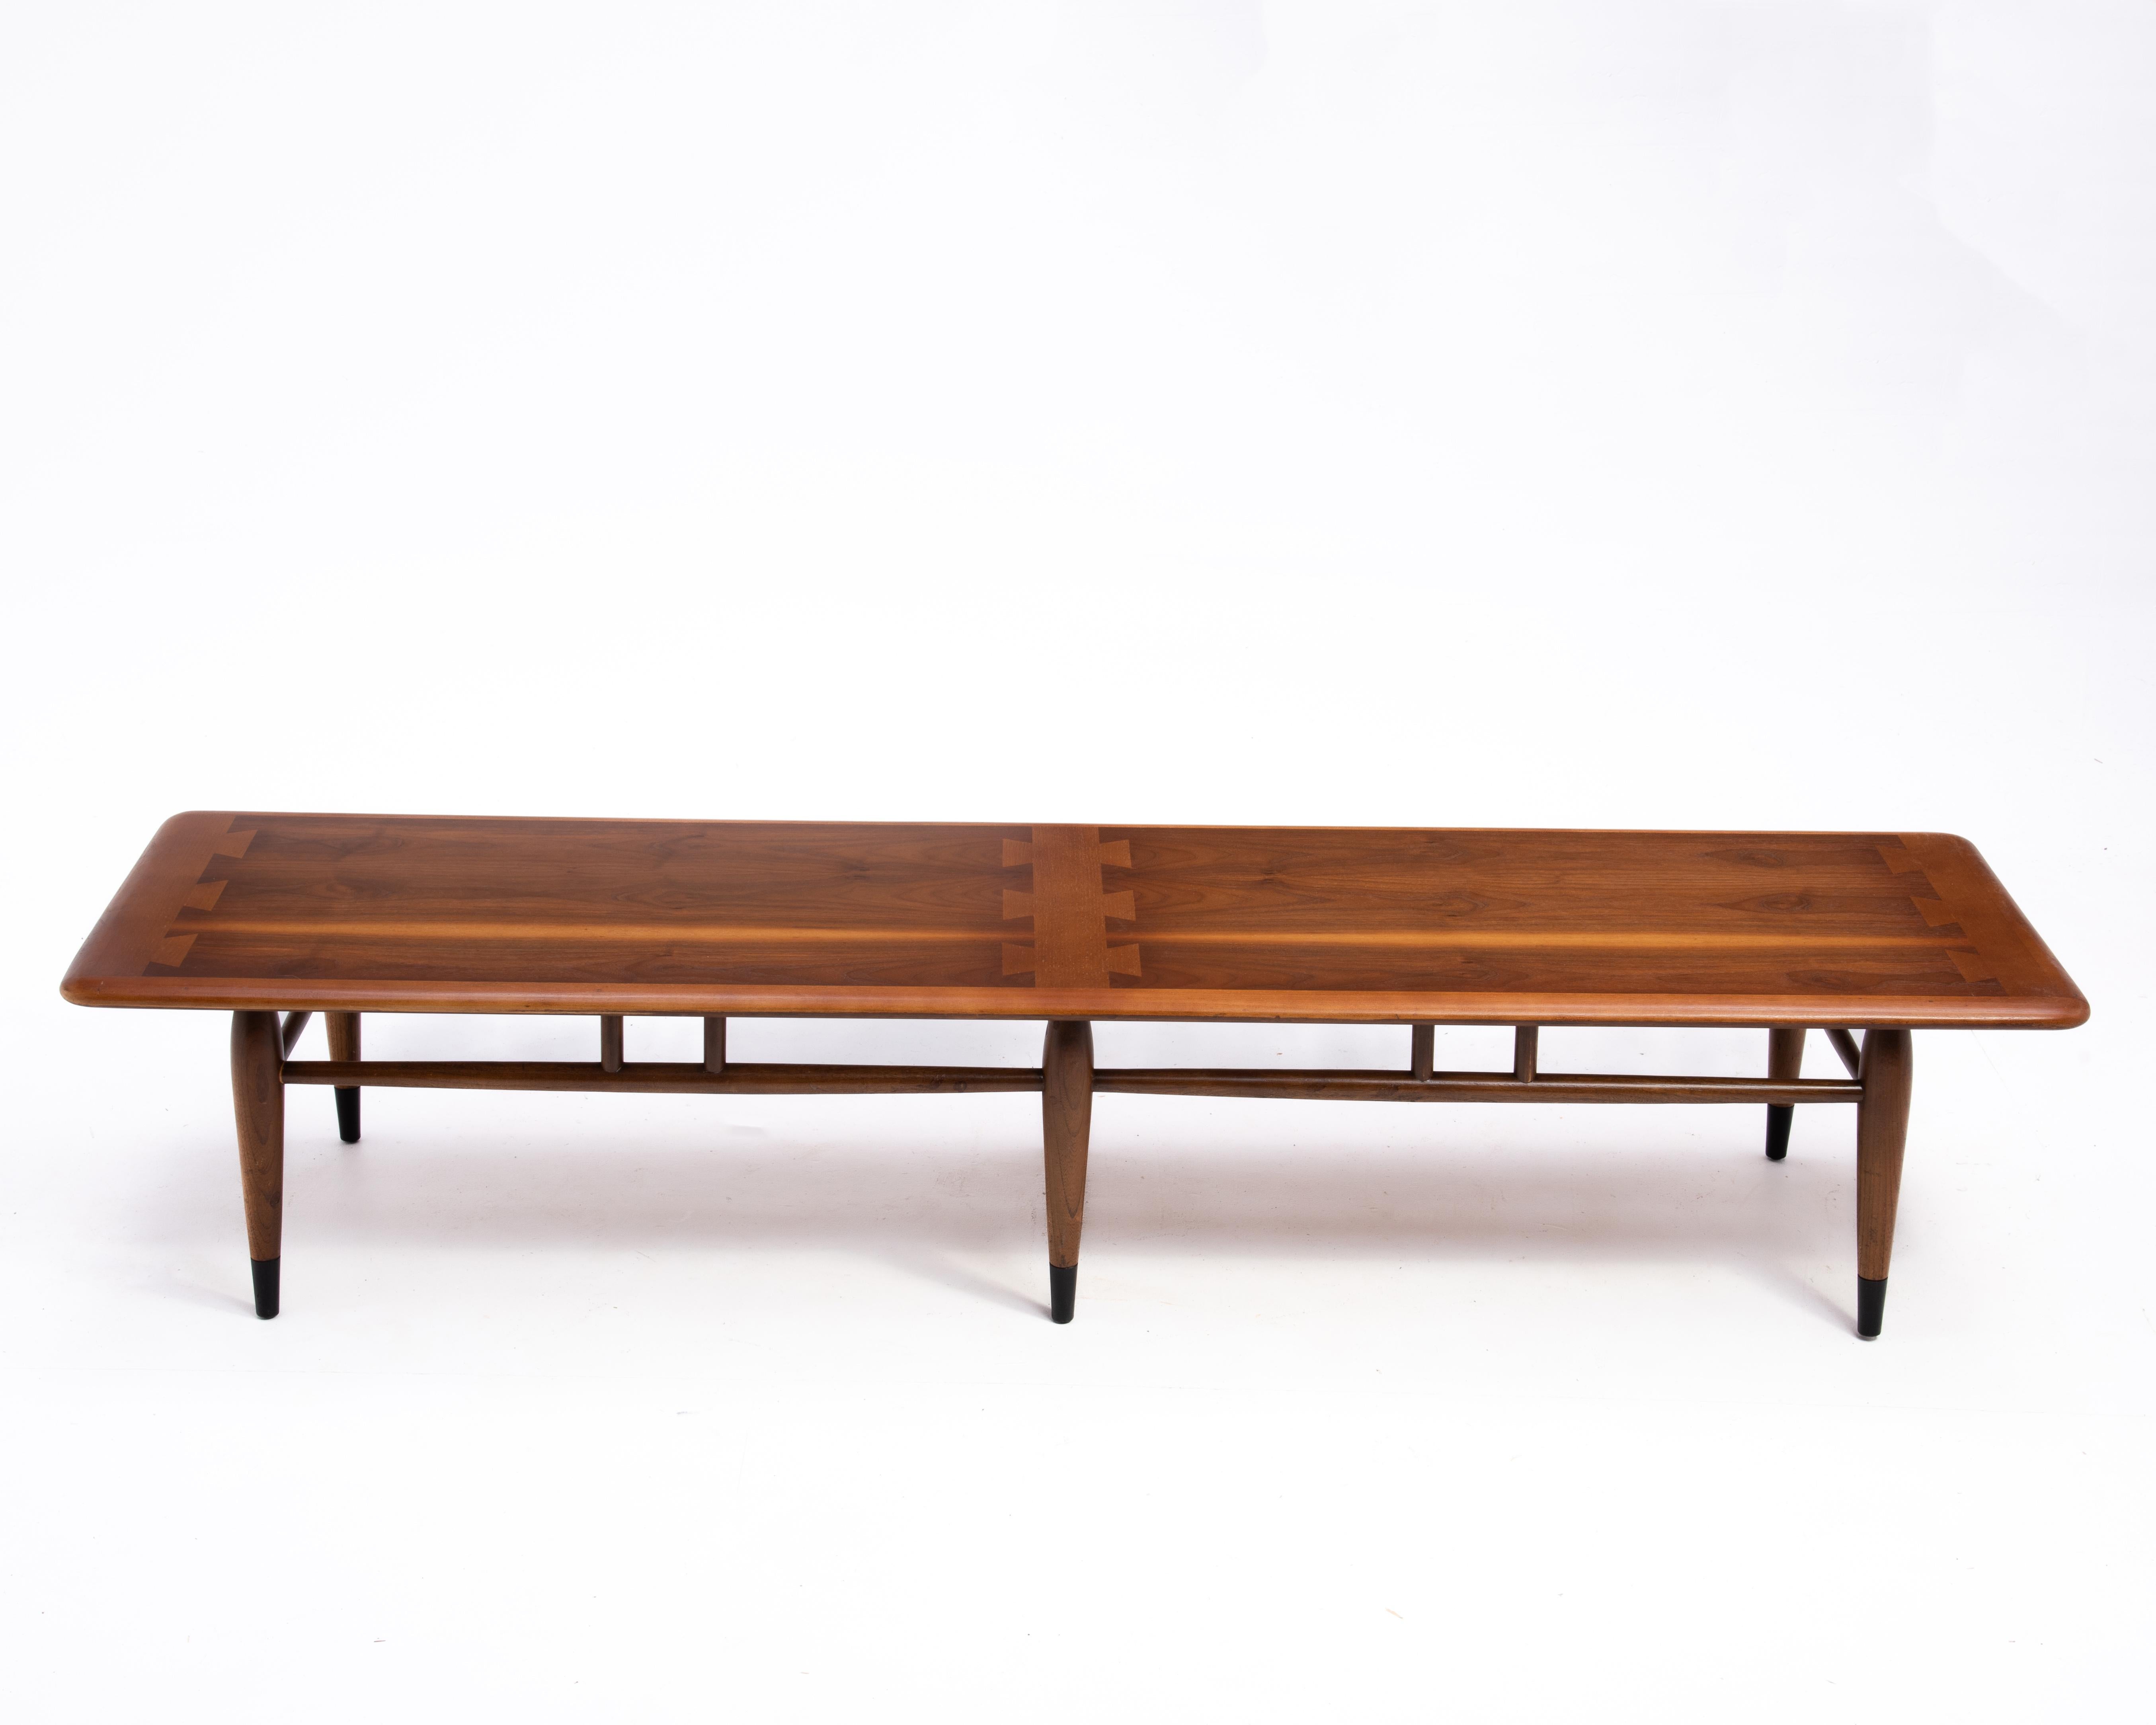 Metal Mid-Century Modern Lane Acclaim Walnut Coffee Table Andre Bus Style 900 09 For Sale